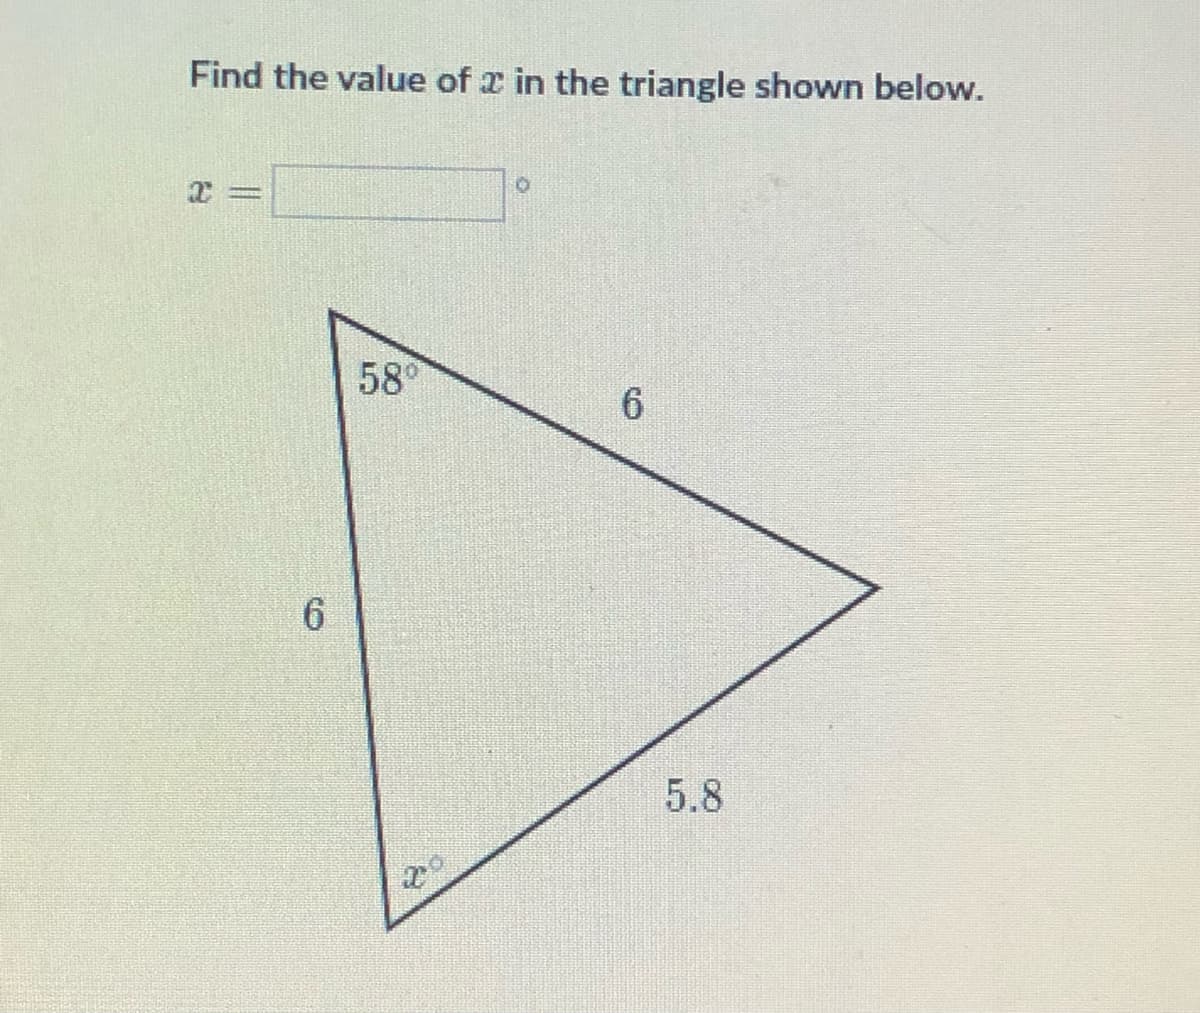 Find the value of x in the triangle shown below.
58°
6
6.
5.8
